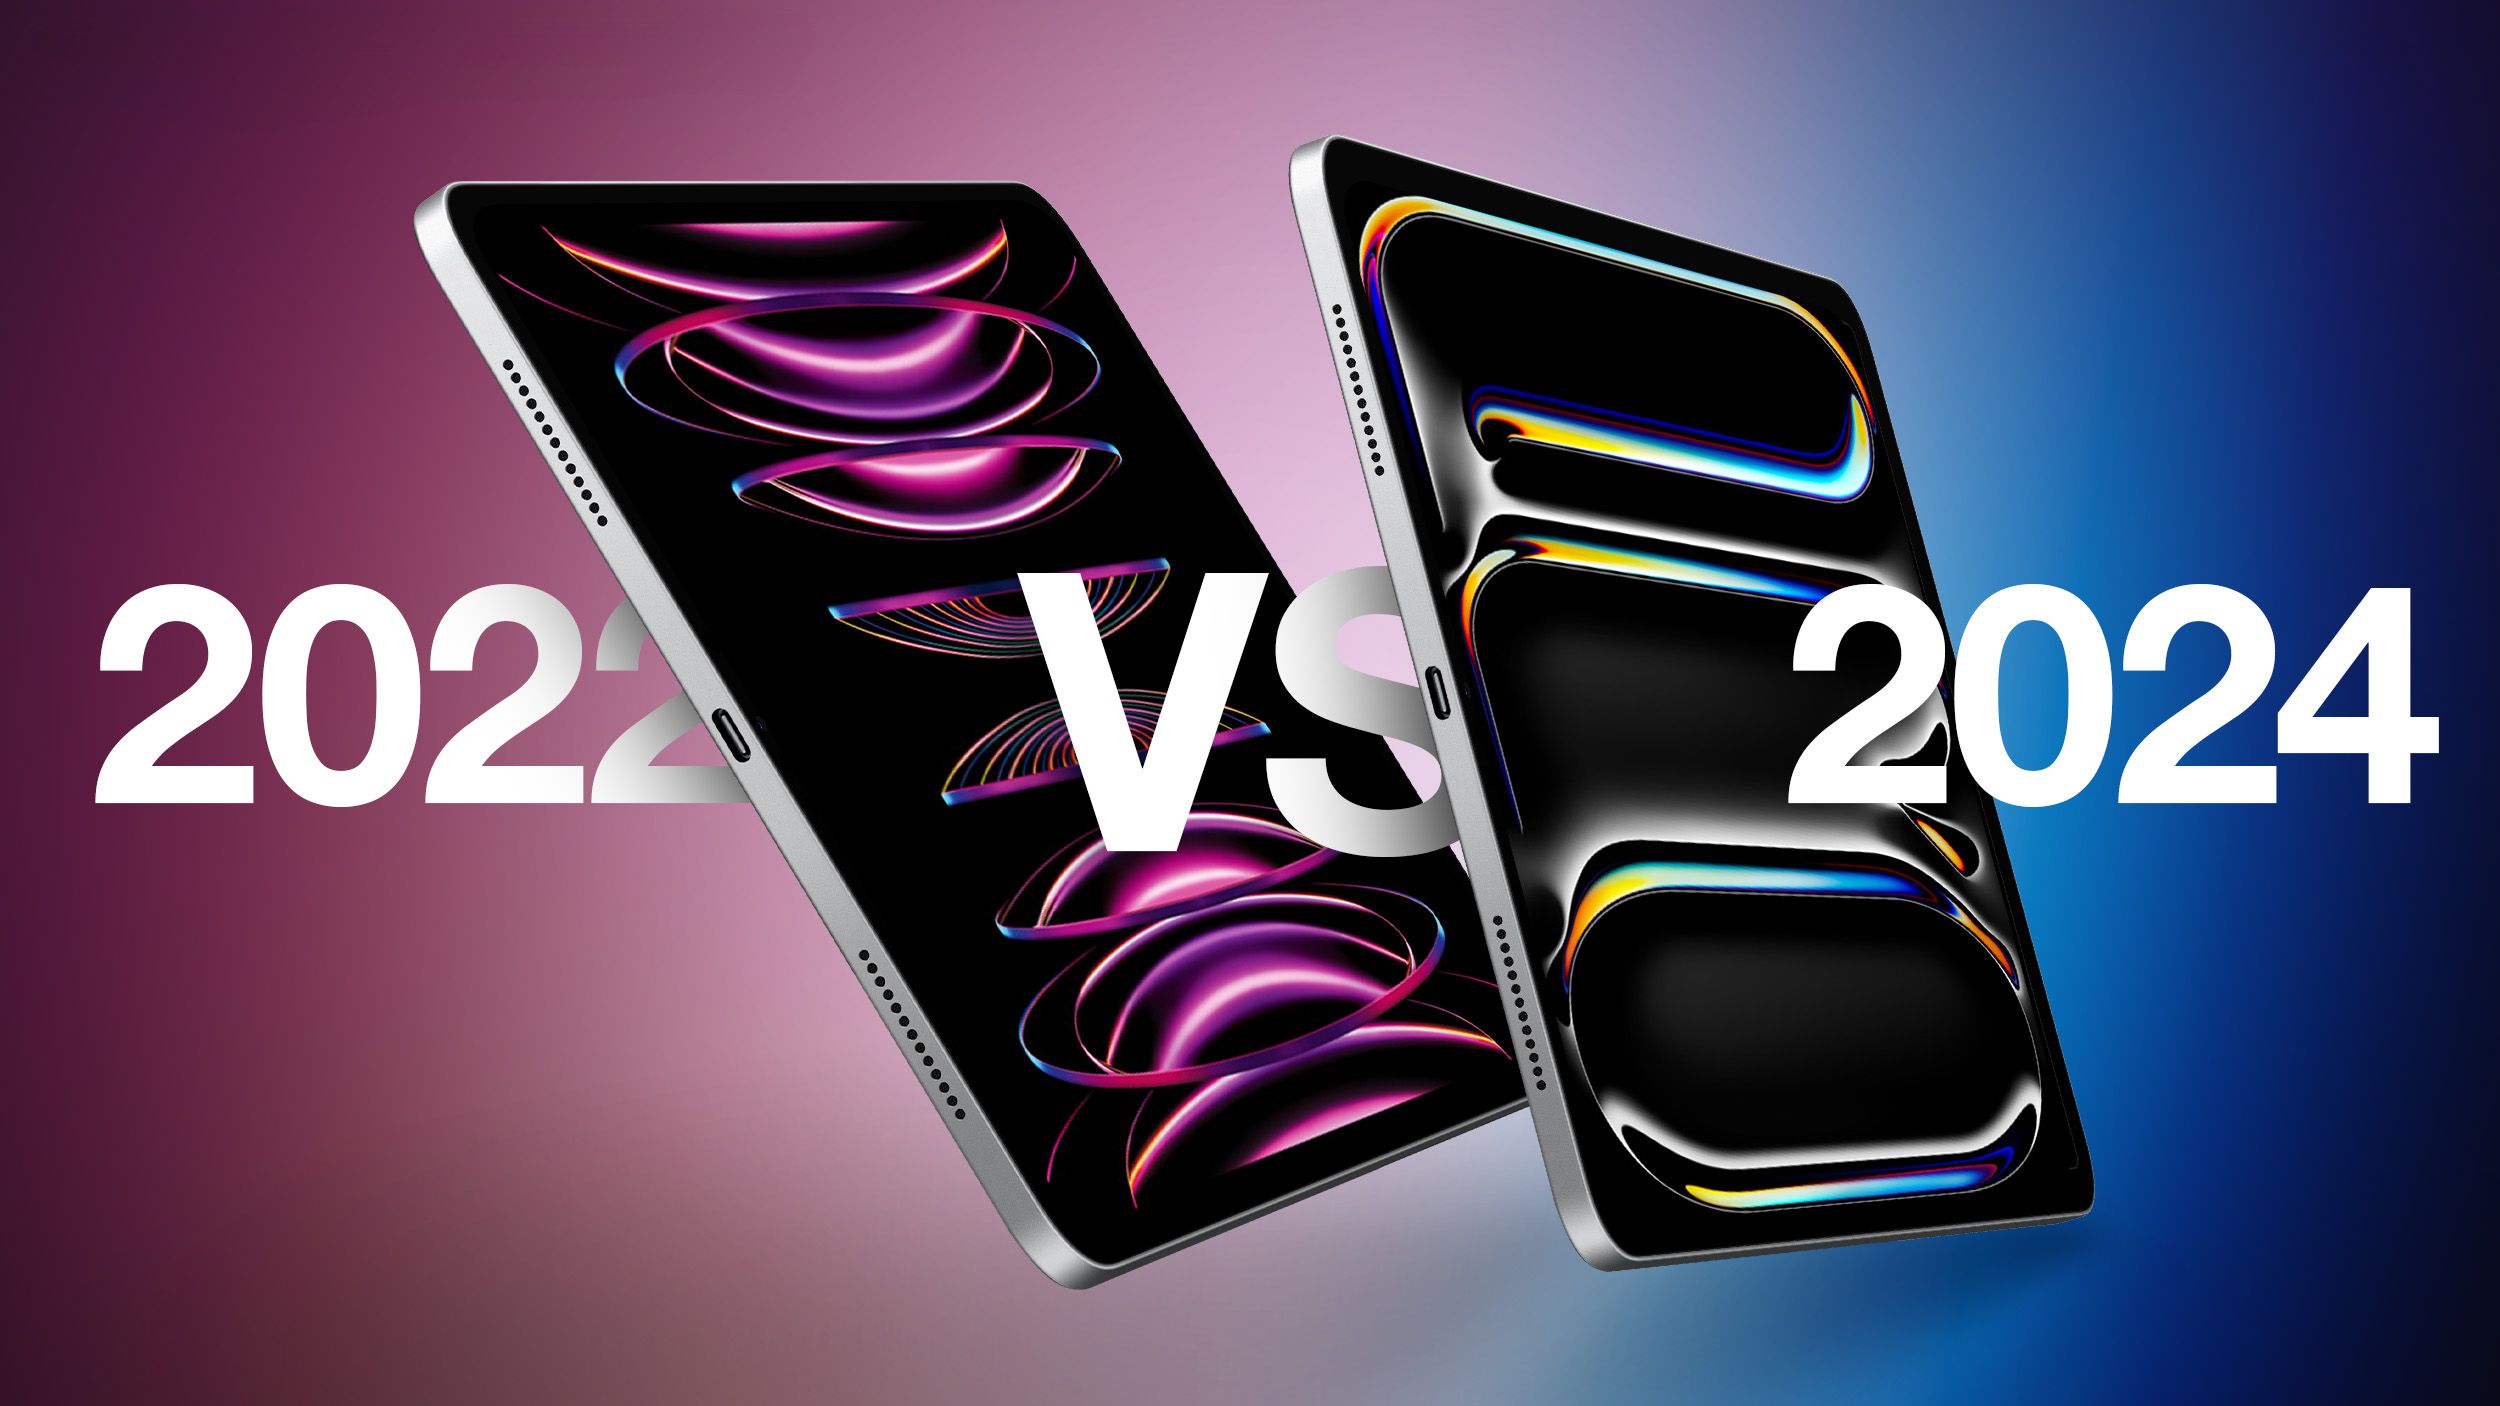 iPad Pro 2022 vs. iPad Pro 2024 Buyer's Guide 25 Differences Compared